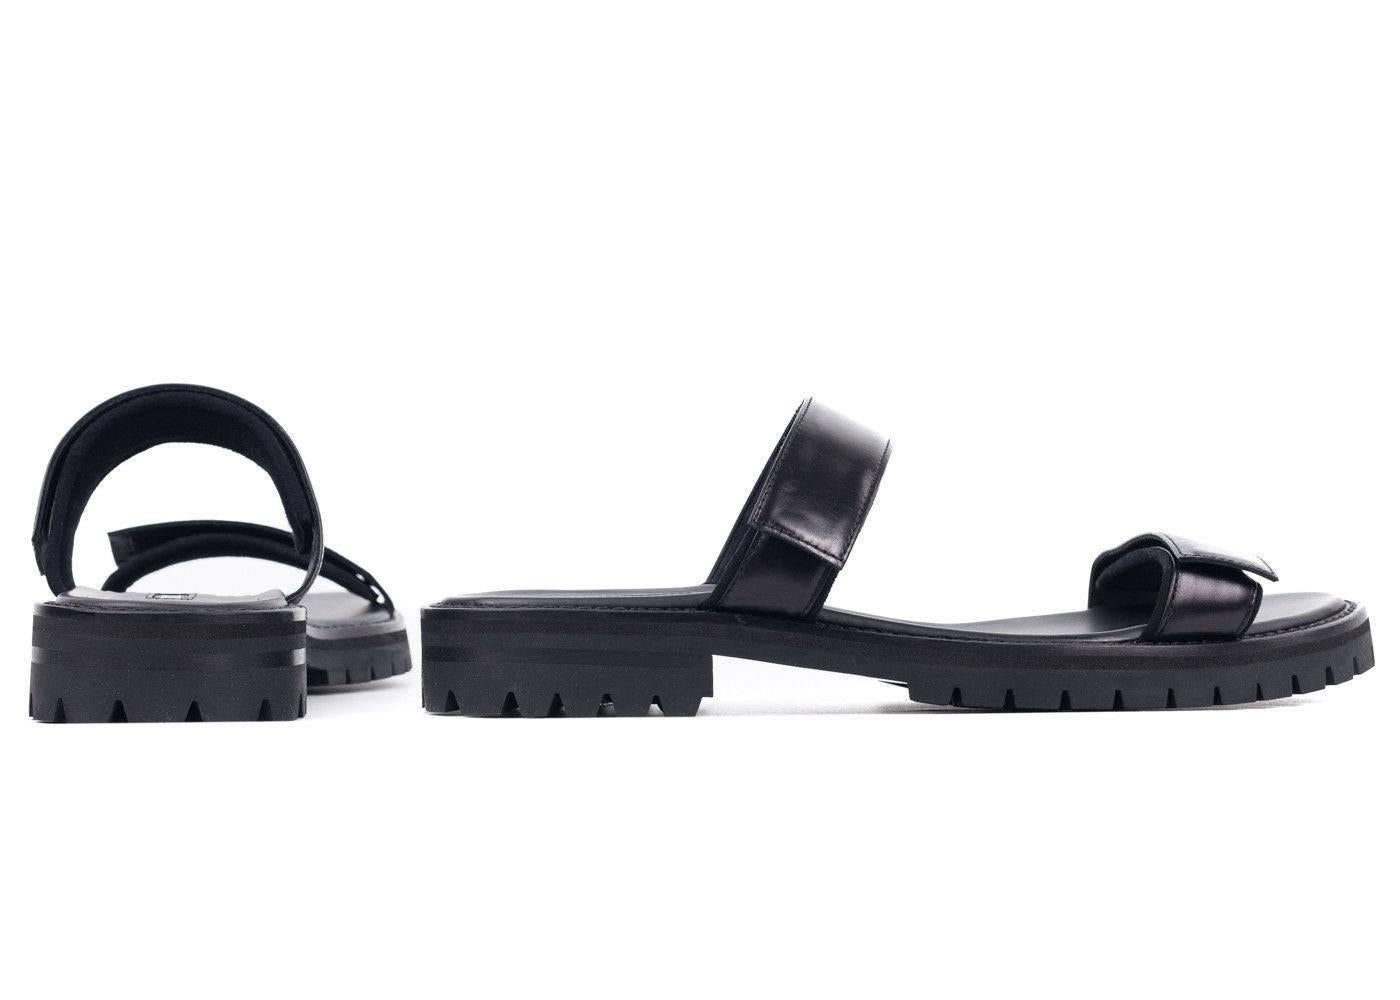 Ann Demeulemeester's calf leather men's sandals with a velcro strap fastening. Perfect for the incoming spring summer season, these sandals are great to wear at teh beack or with basic voard shorts and t-shirt. Very comfortable and convenient for